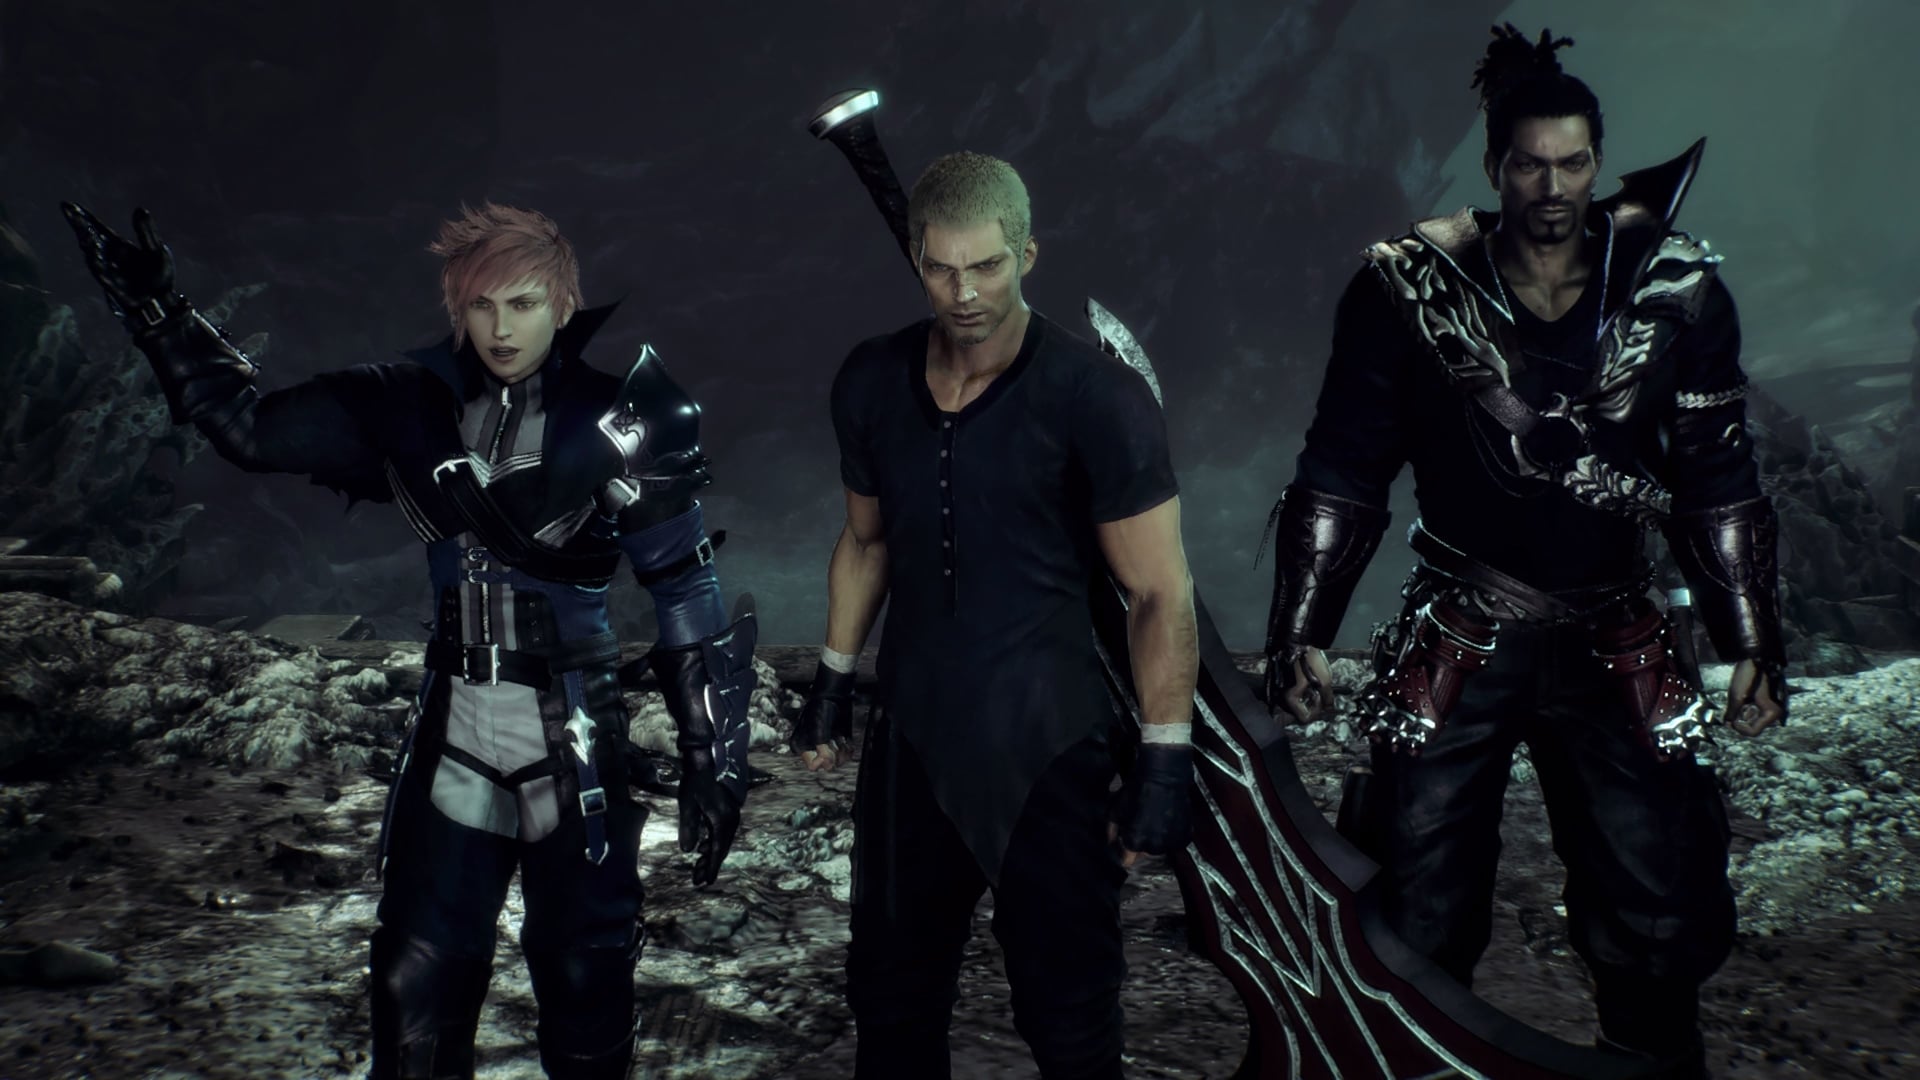 FINAL FANTASY ORIGIN – Available now on Steam